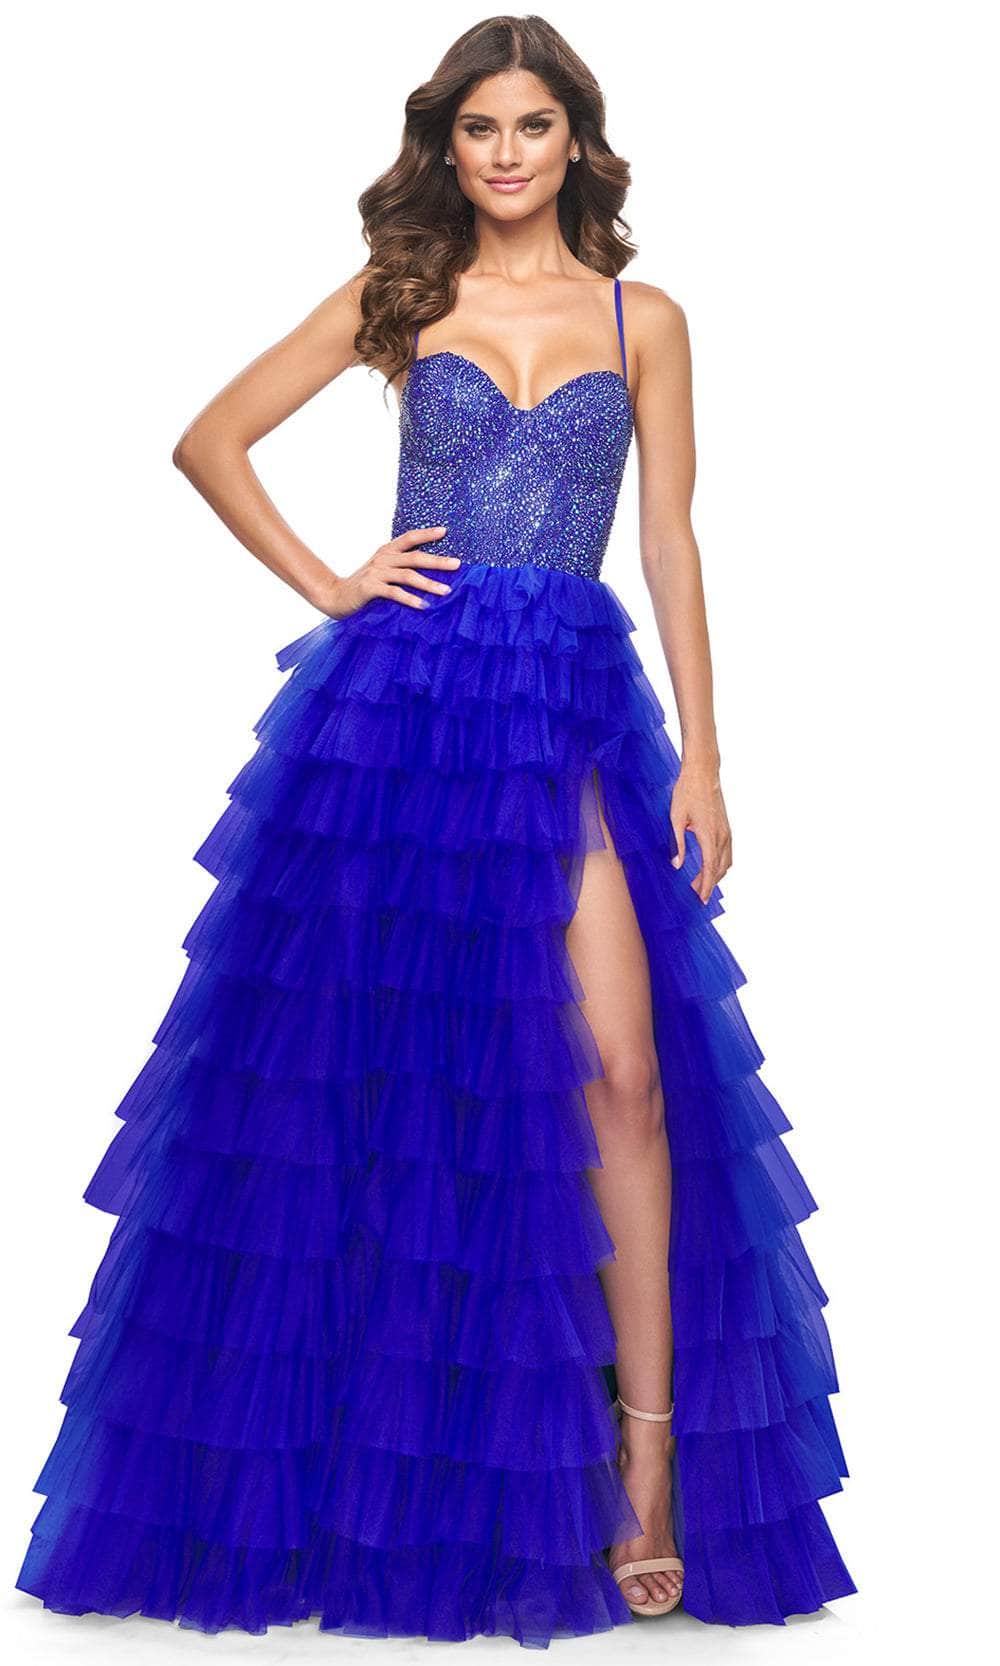 La Femme 32002 - Tiered Ruffle A-Line Prom Gown Evening Dresses 00 /  Royal Blue